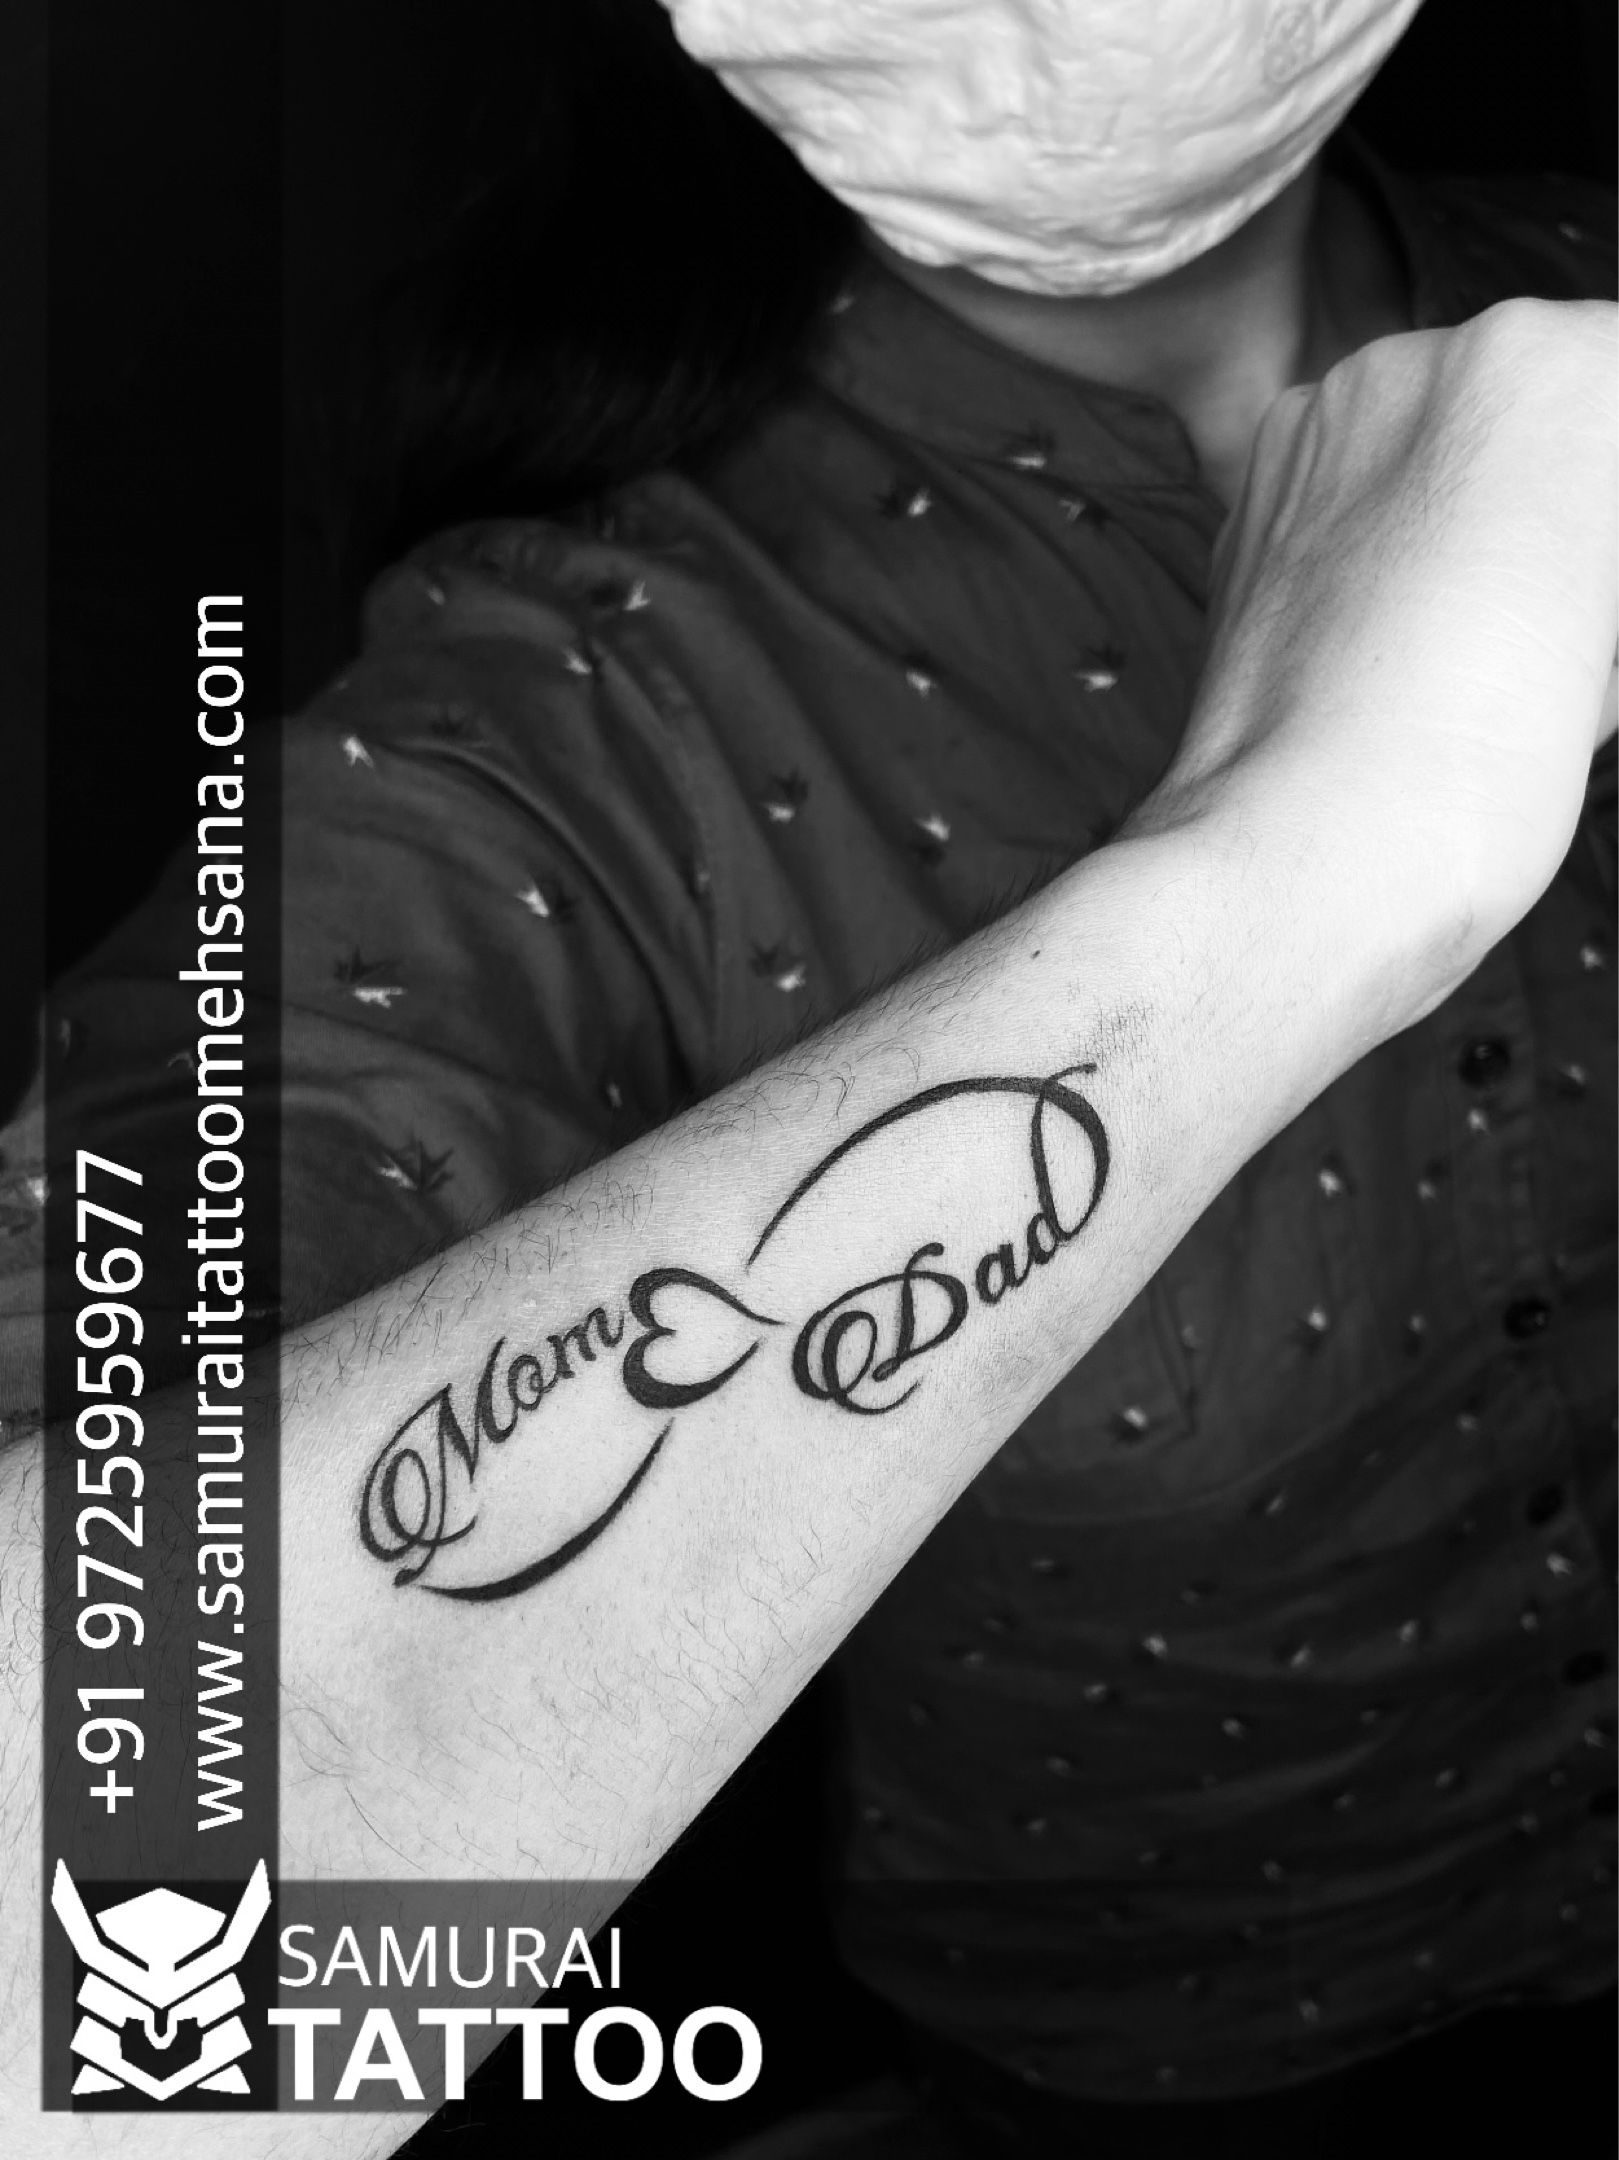 Infinity Tattoo Designs That Are Popular Among Tattoo Lovers